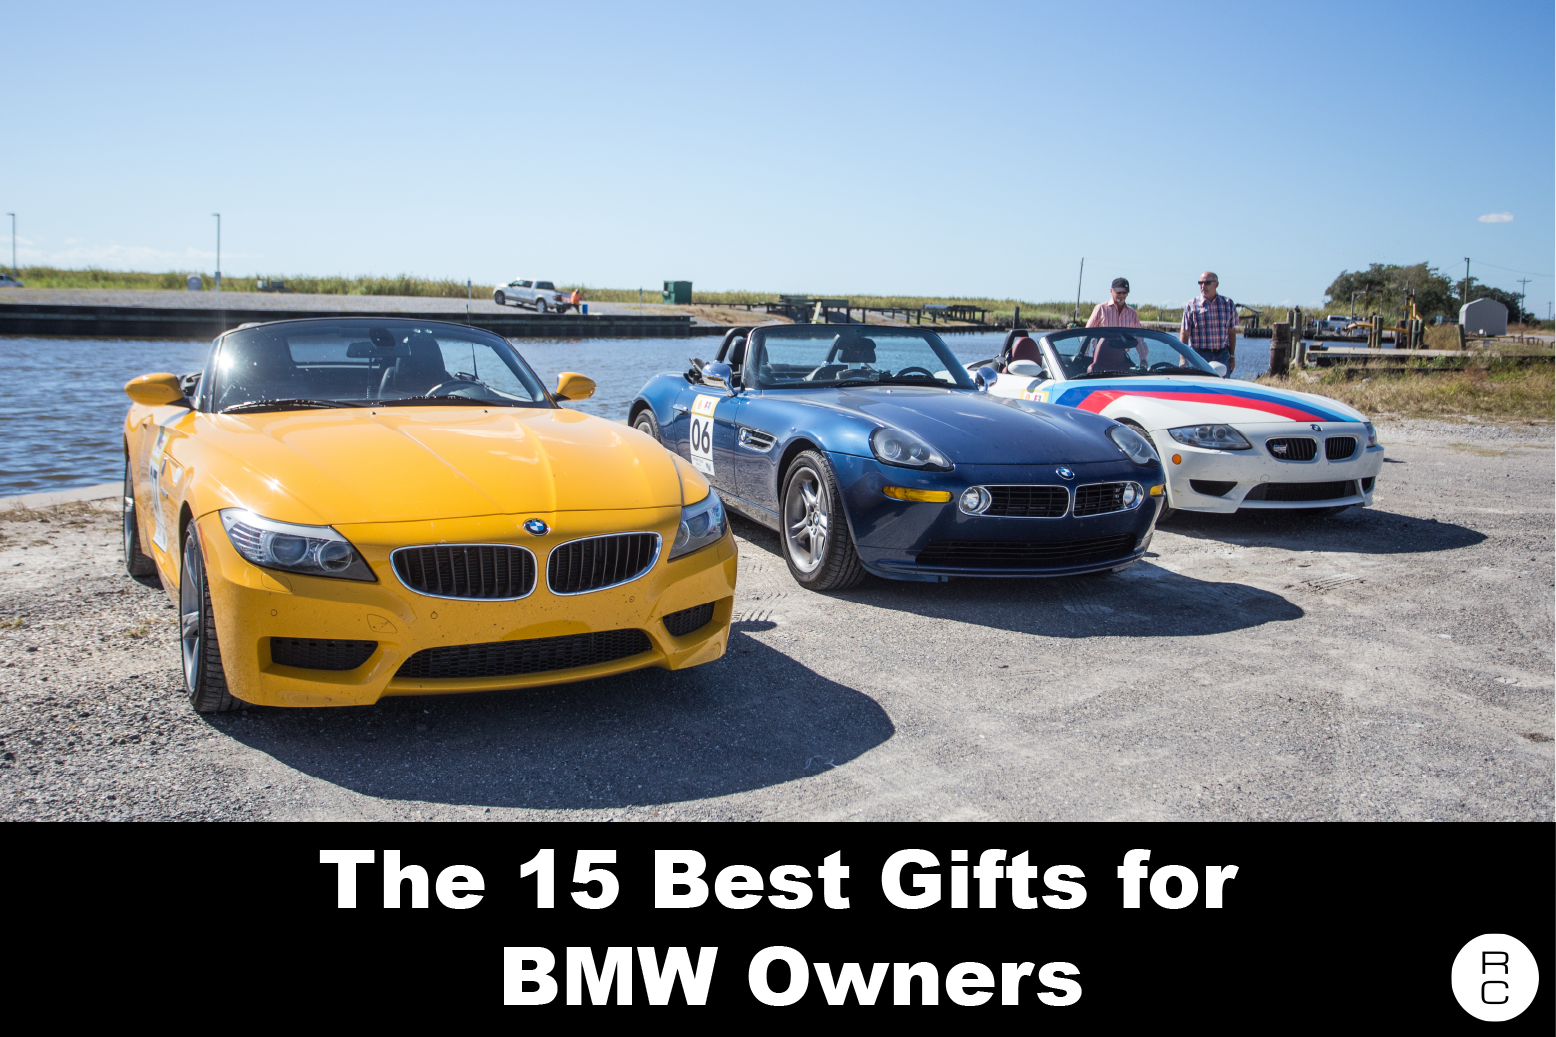 The 15 Best Gifts for BMW Owners